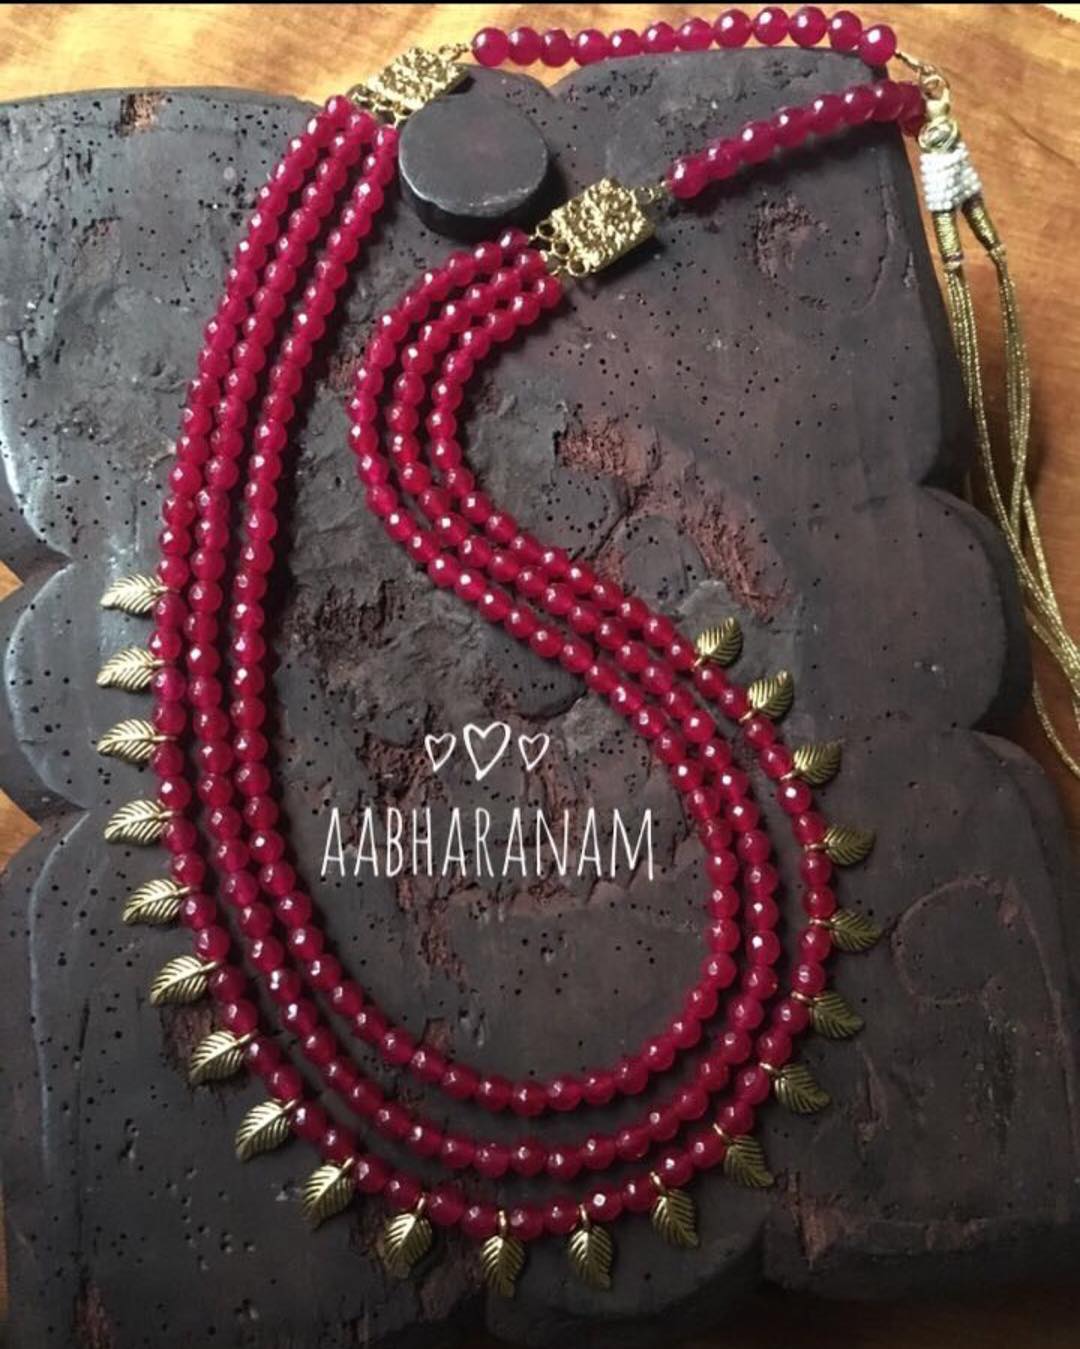 Multilayer Necklace From Aabharanam